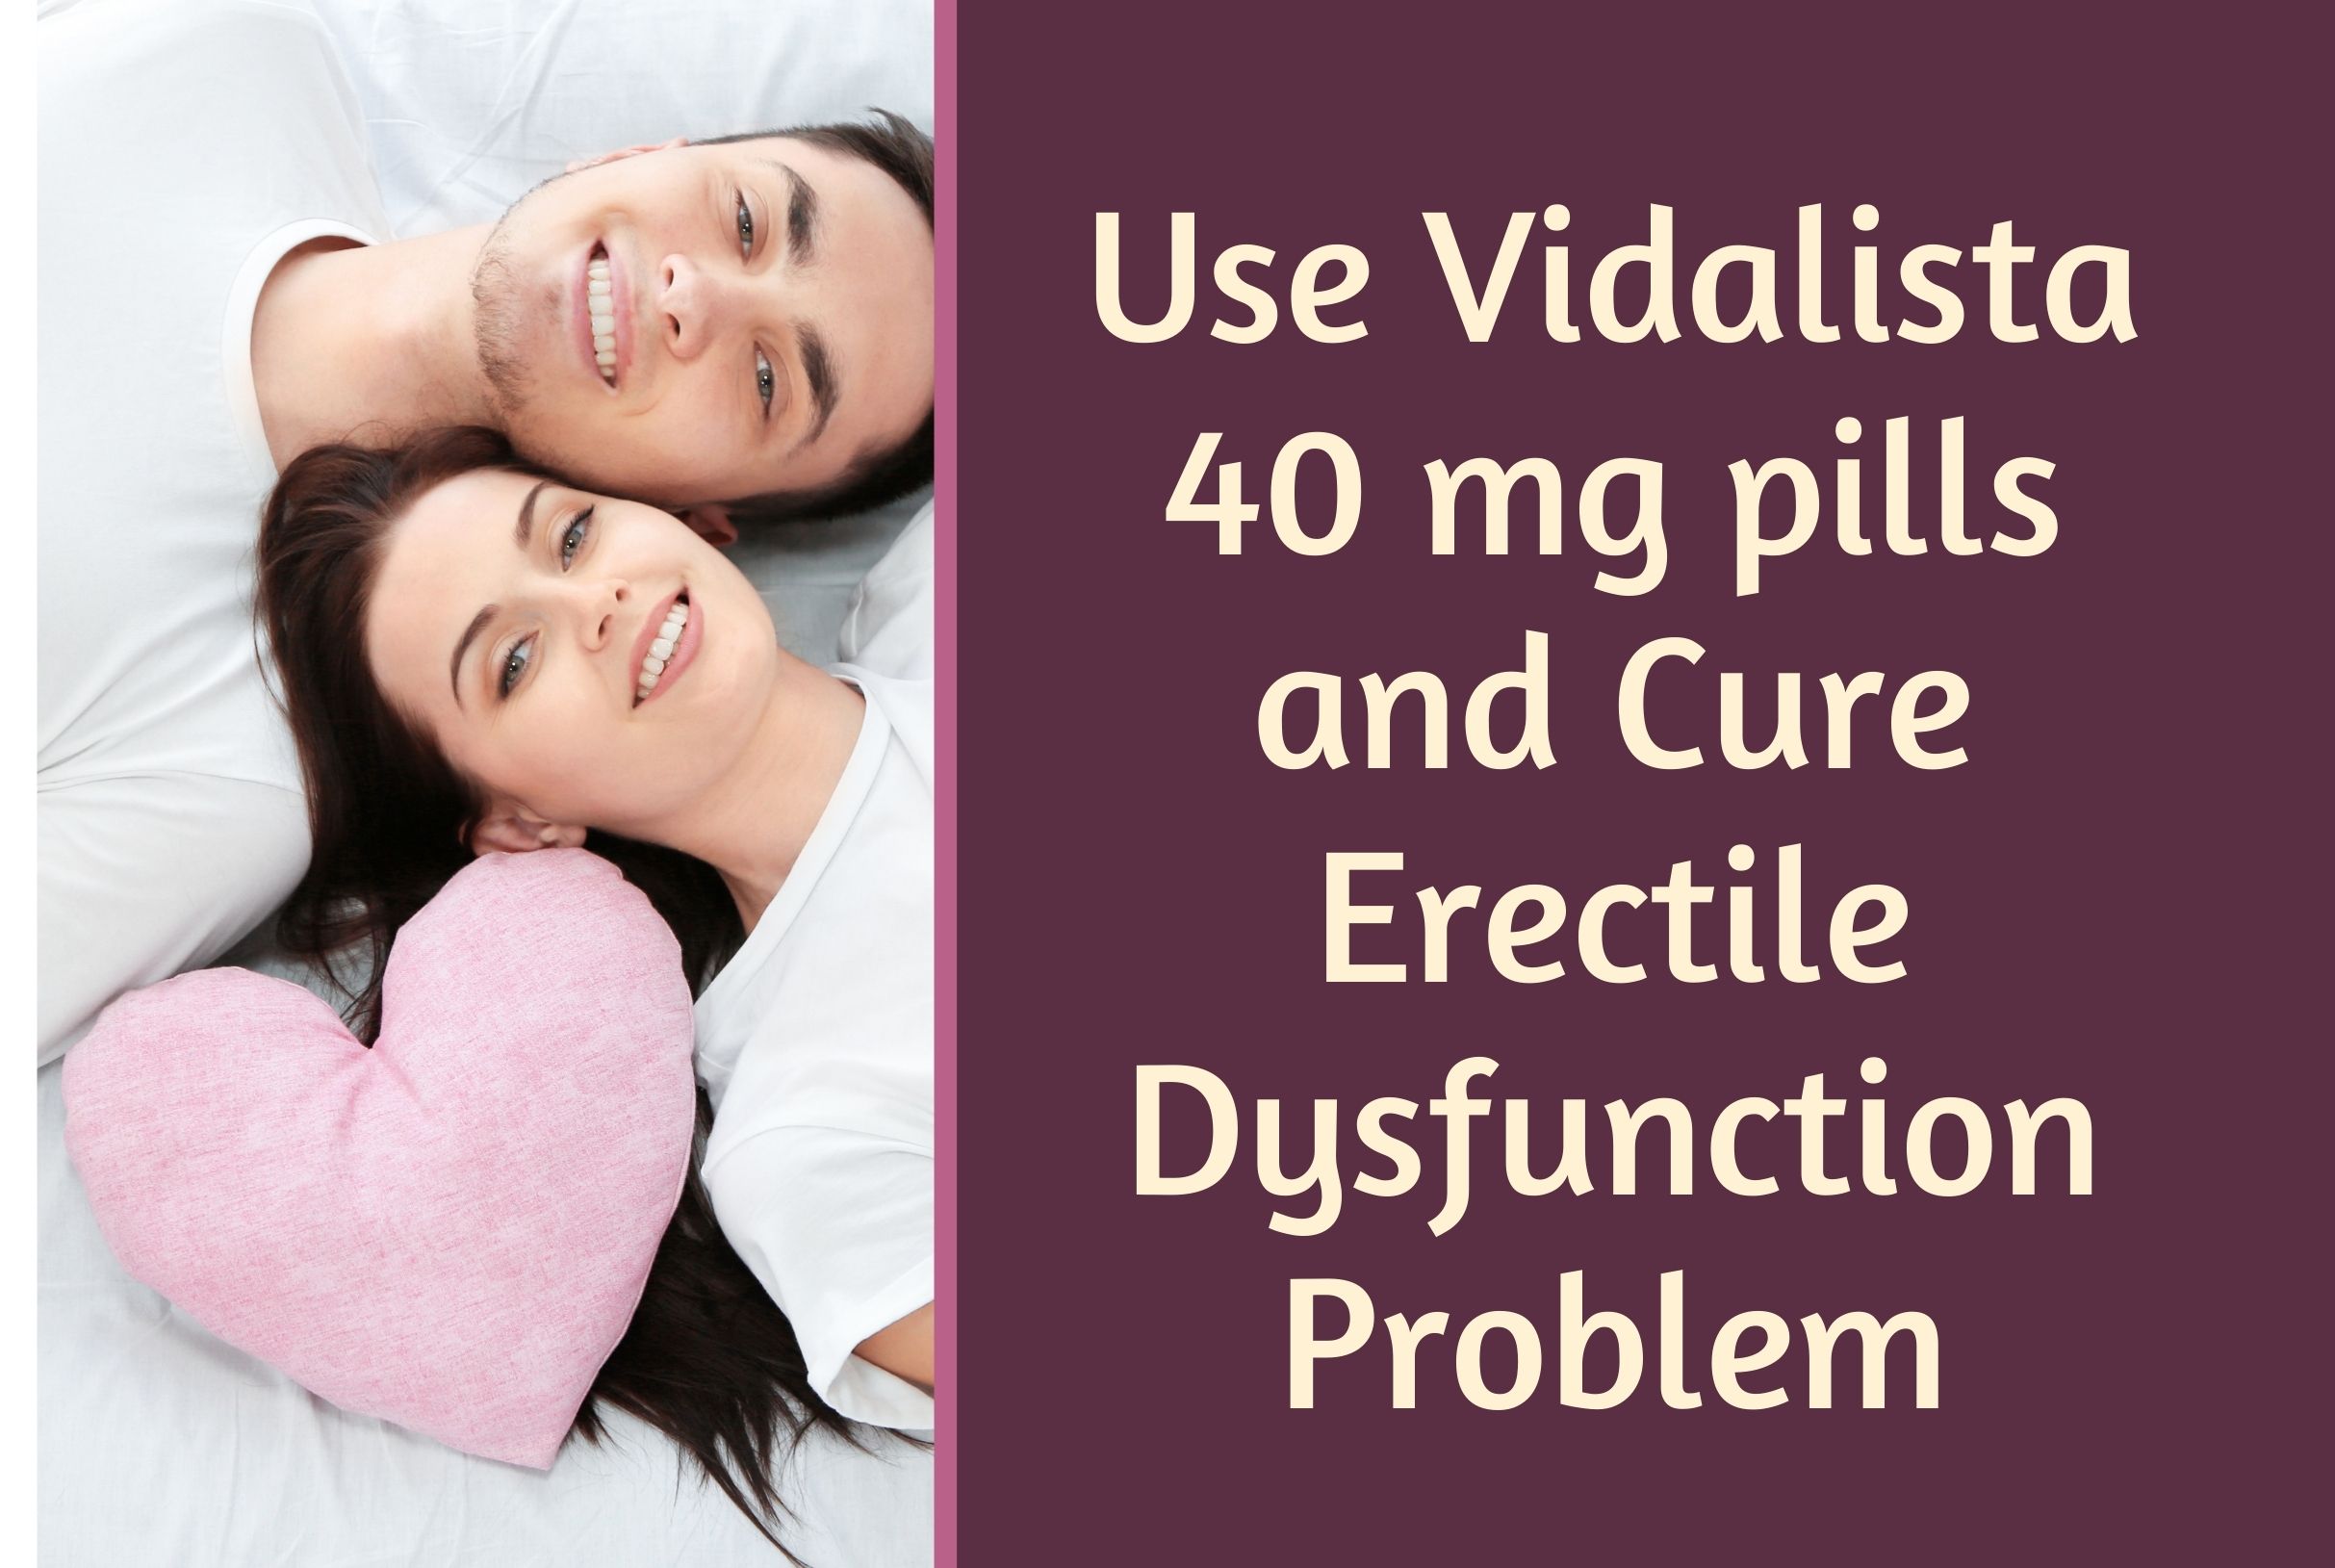 Use Vidalista 40 mg pills and Cure Erectile Dysfunction Problem